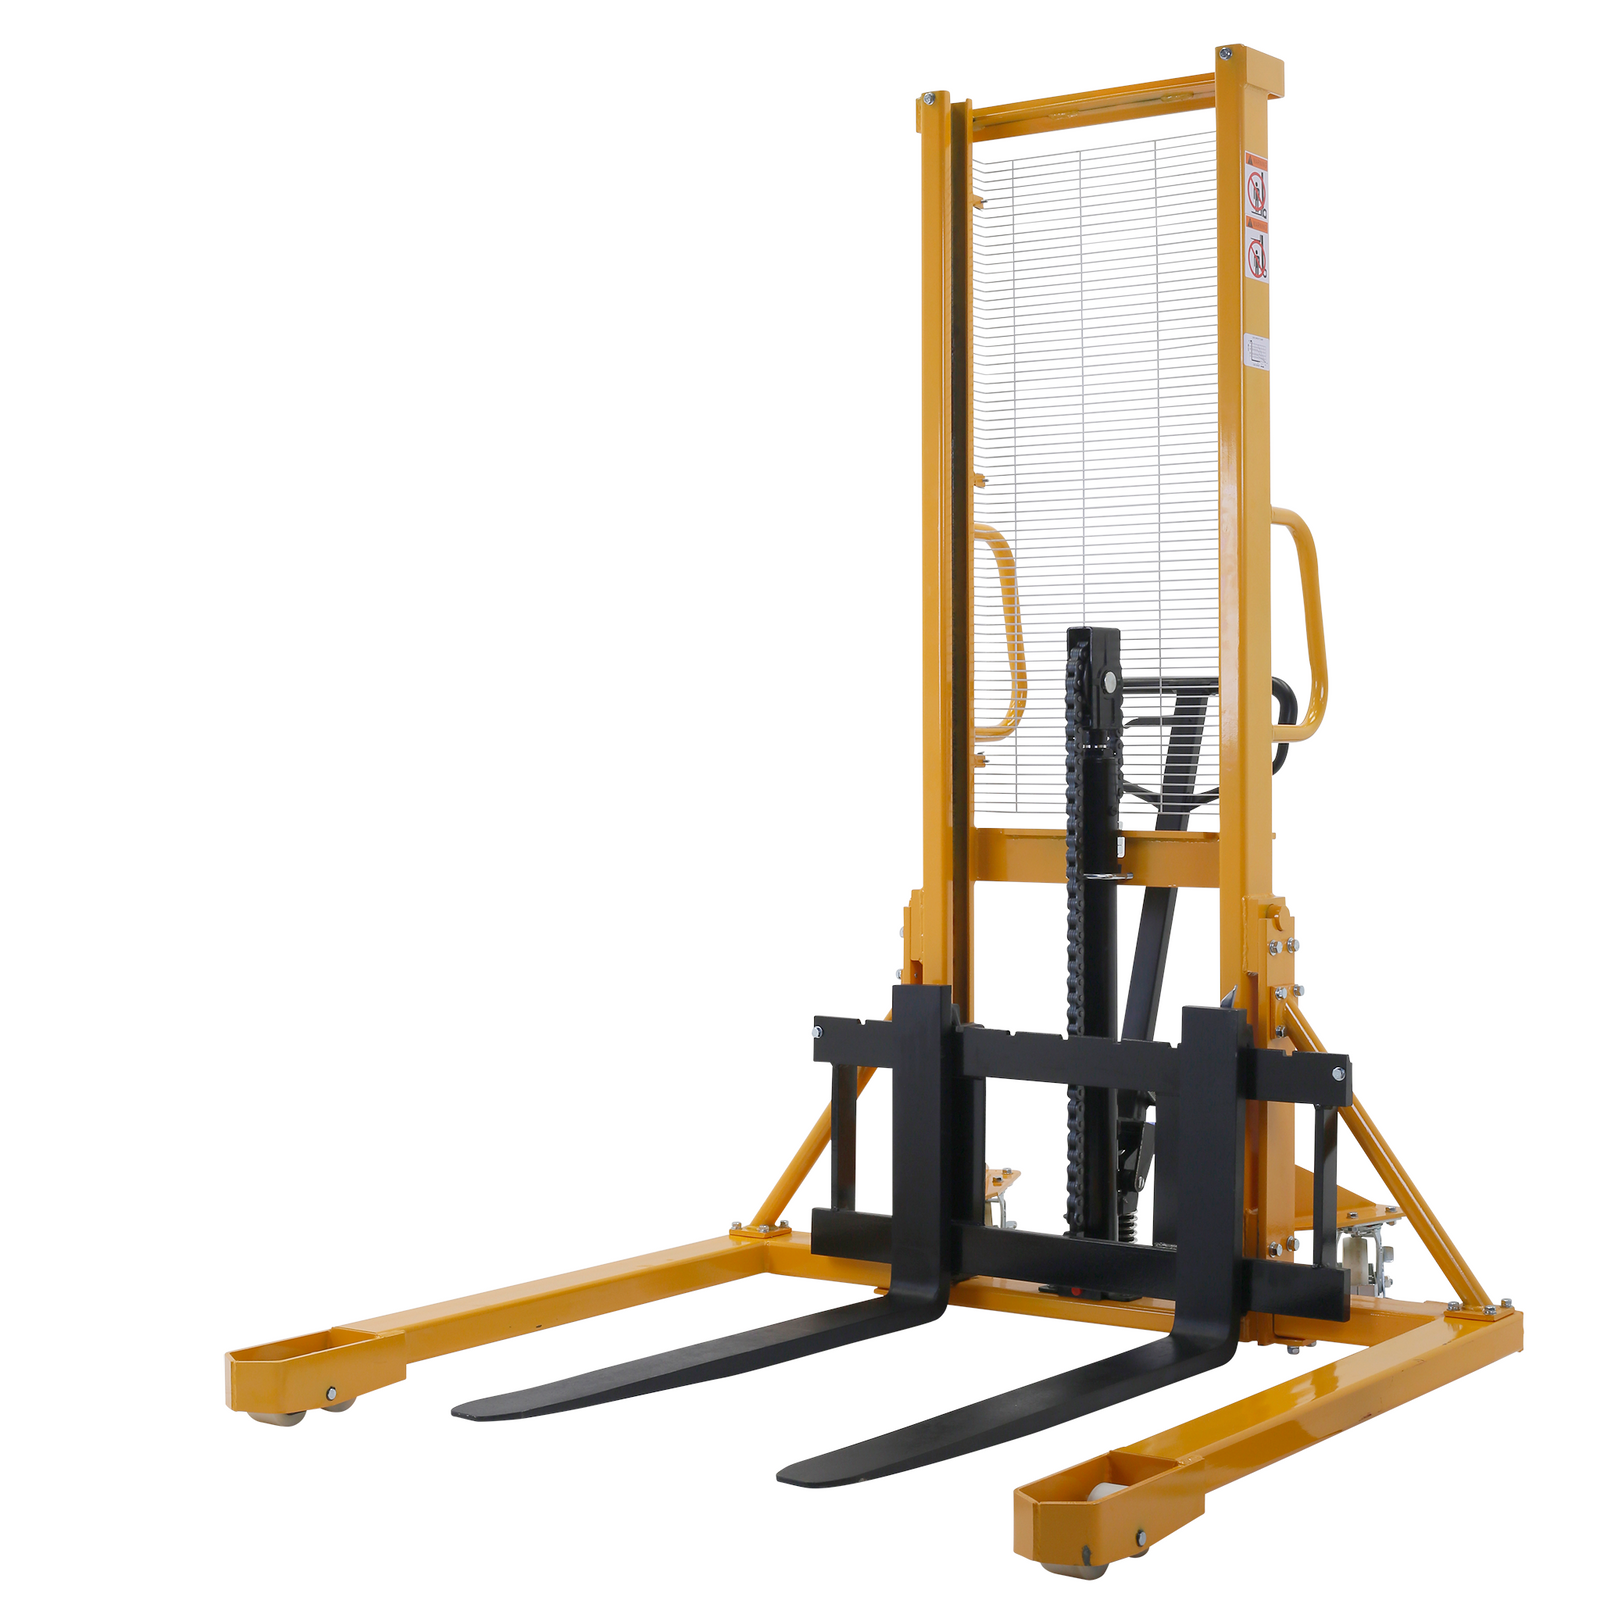 Diagonal view of a yellow and black JORESTECH heavy duty manual pallet stacker over white background